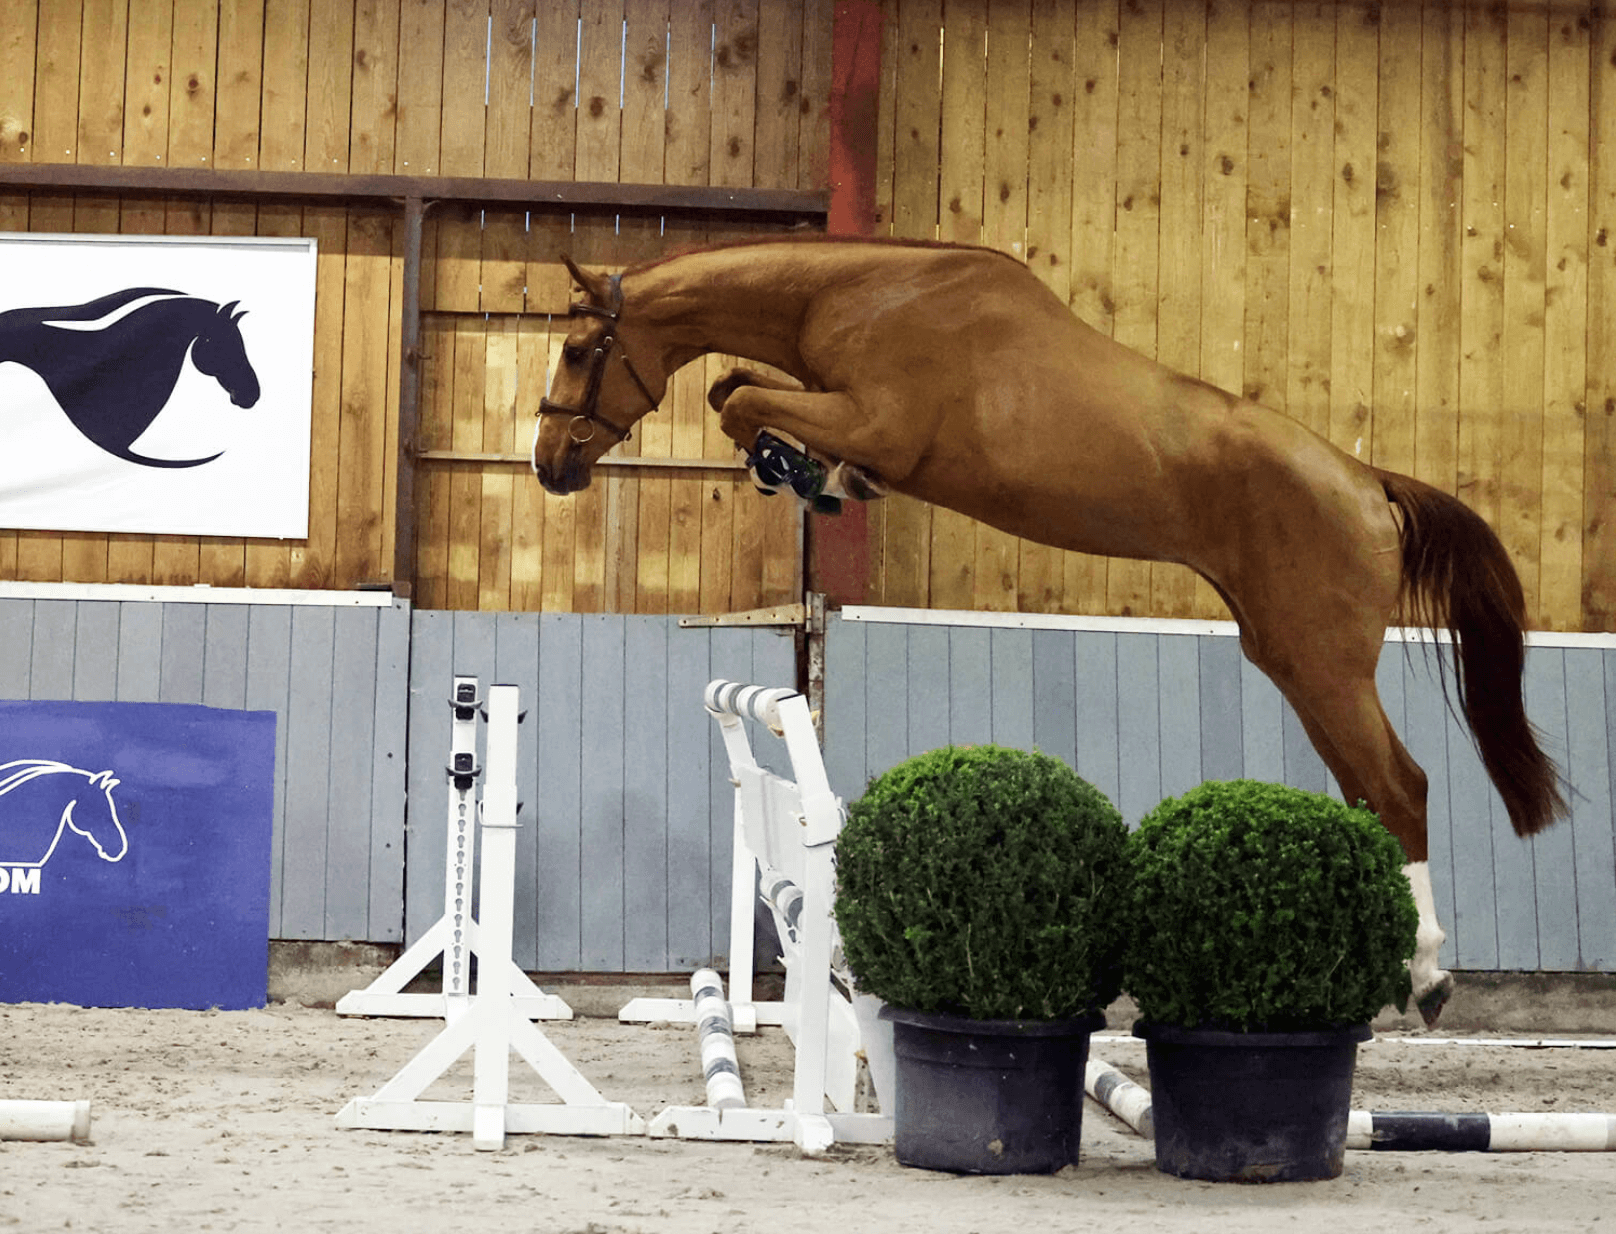 Equestrian-auctions brings the future of show jumping within reach this holiday season!